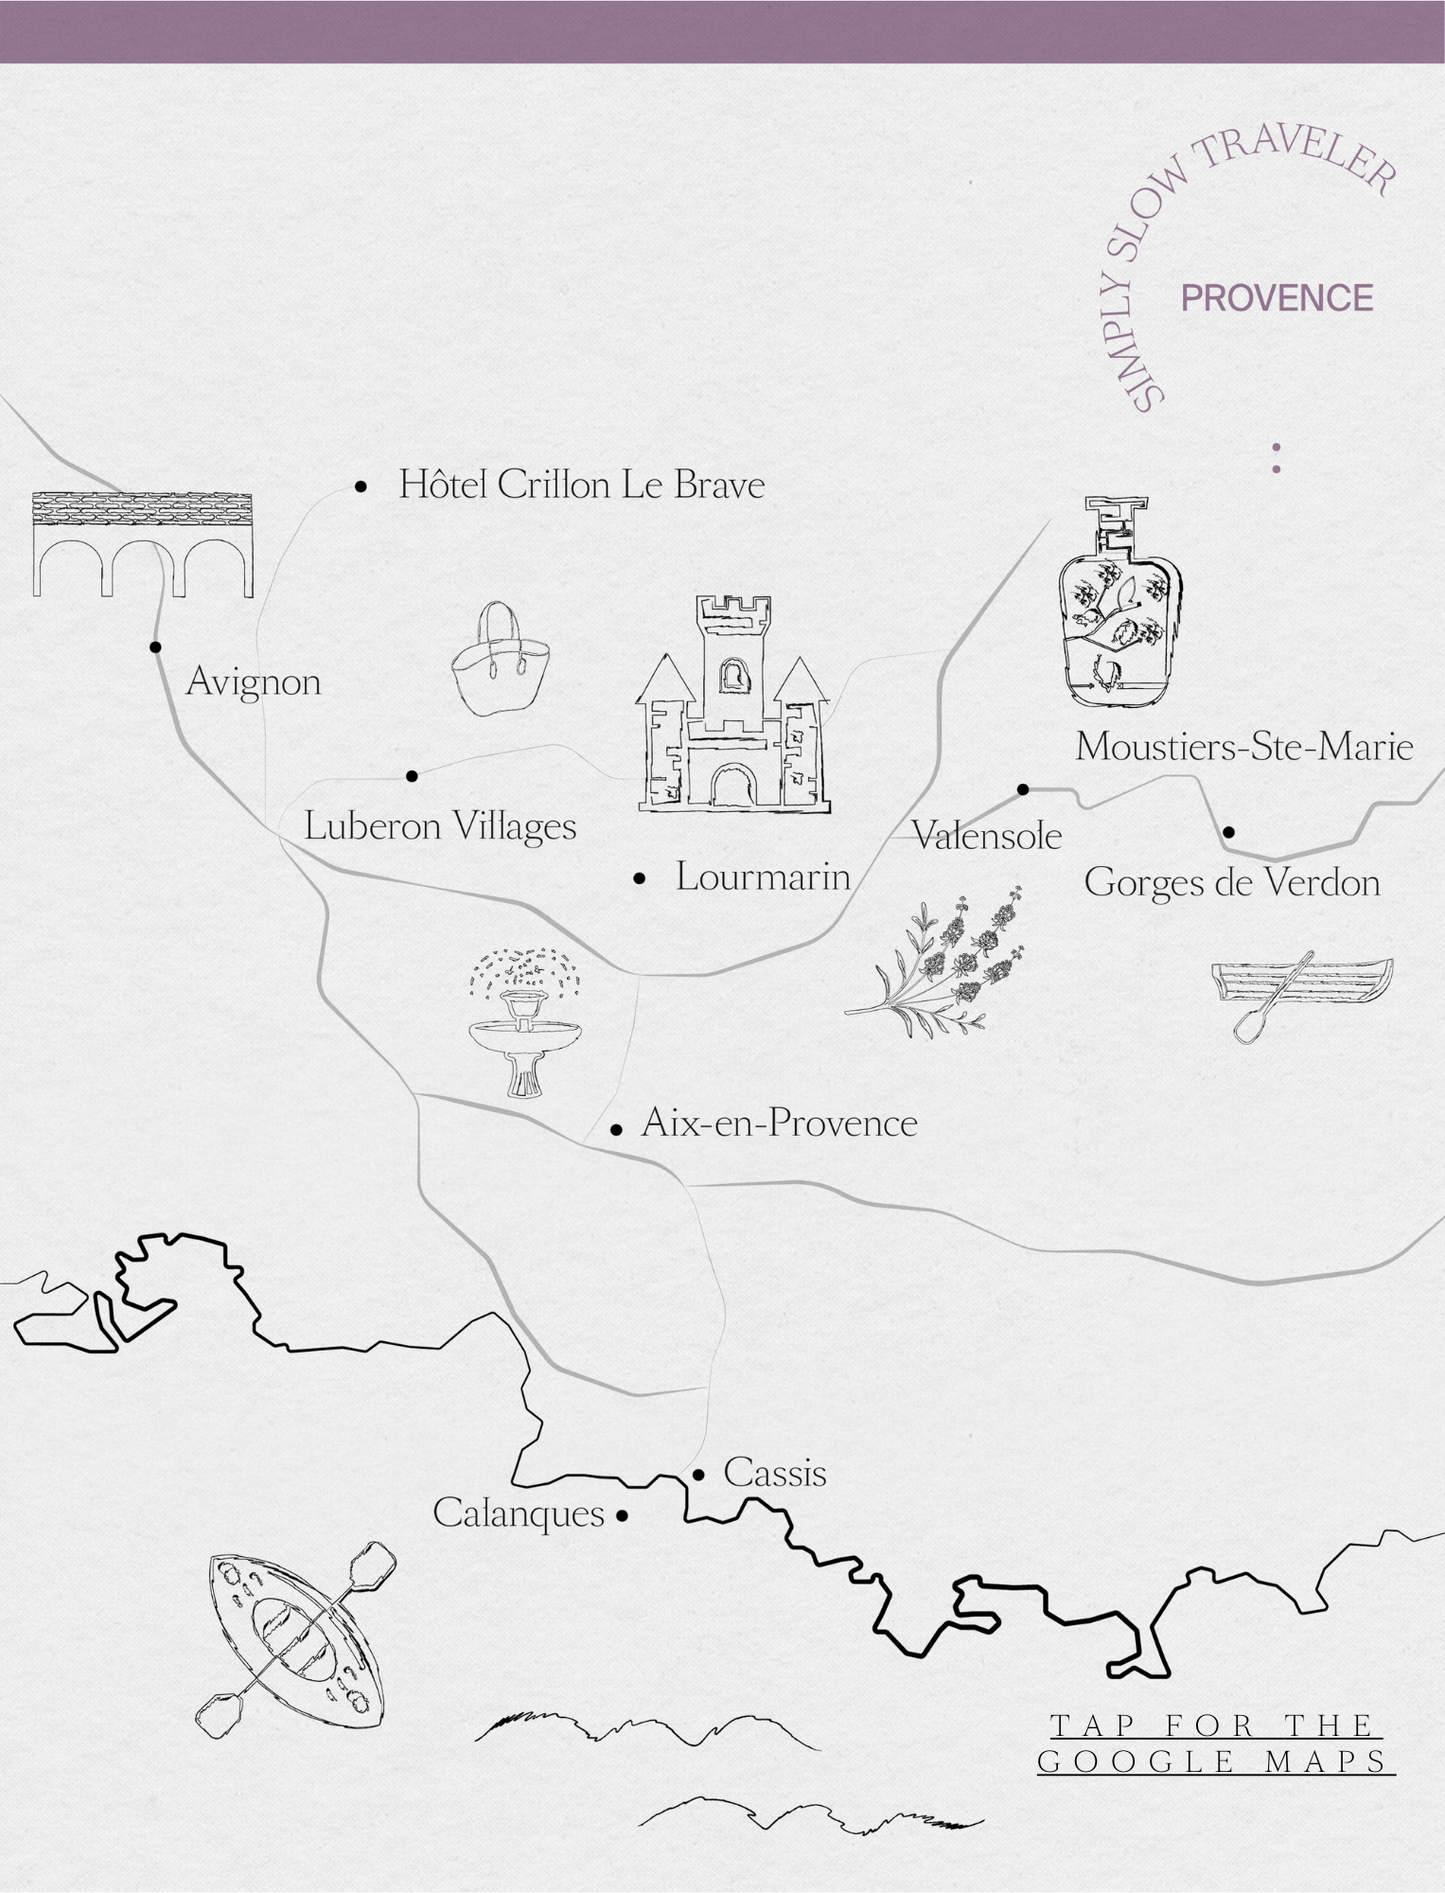 A Guide to Provence - the map to Provence, by Simply Slow Traveler